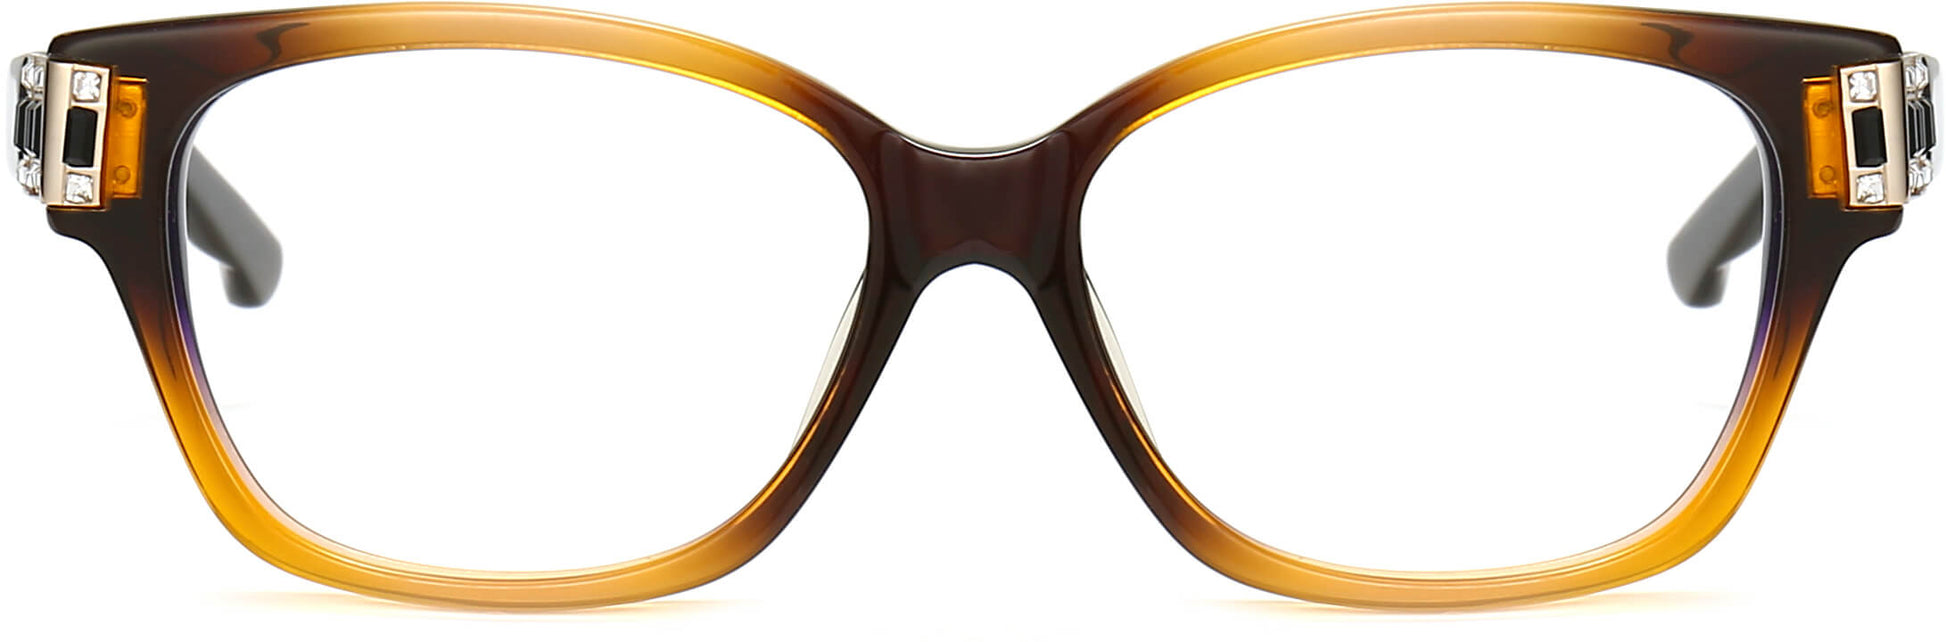 Cleo Cateye Brown Eyeglasses from ANRRI, front view